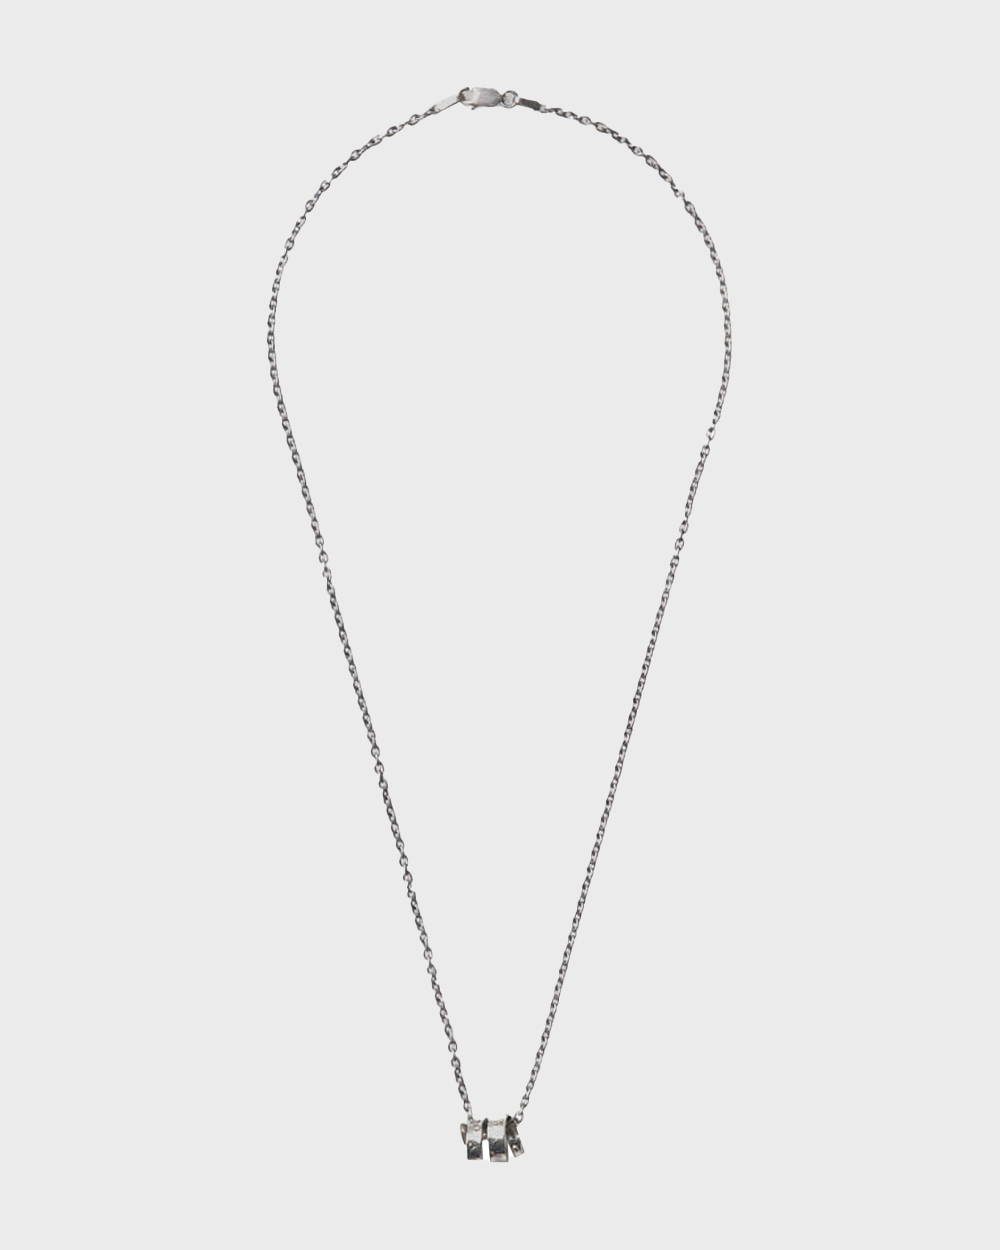 Necklace (N-626)